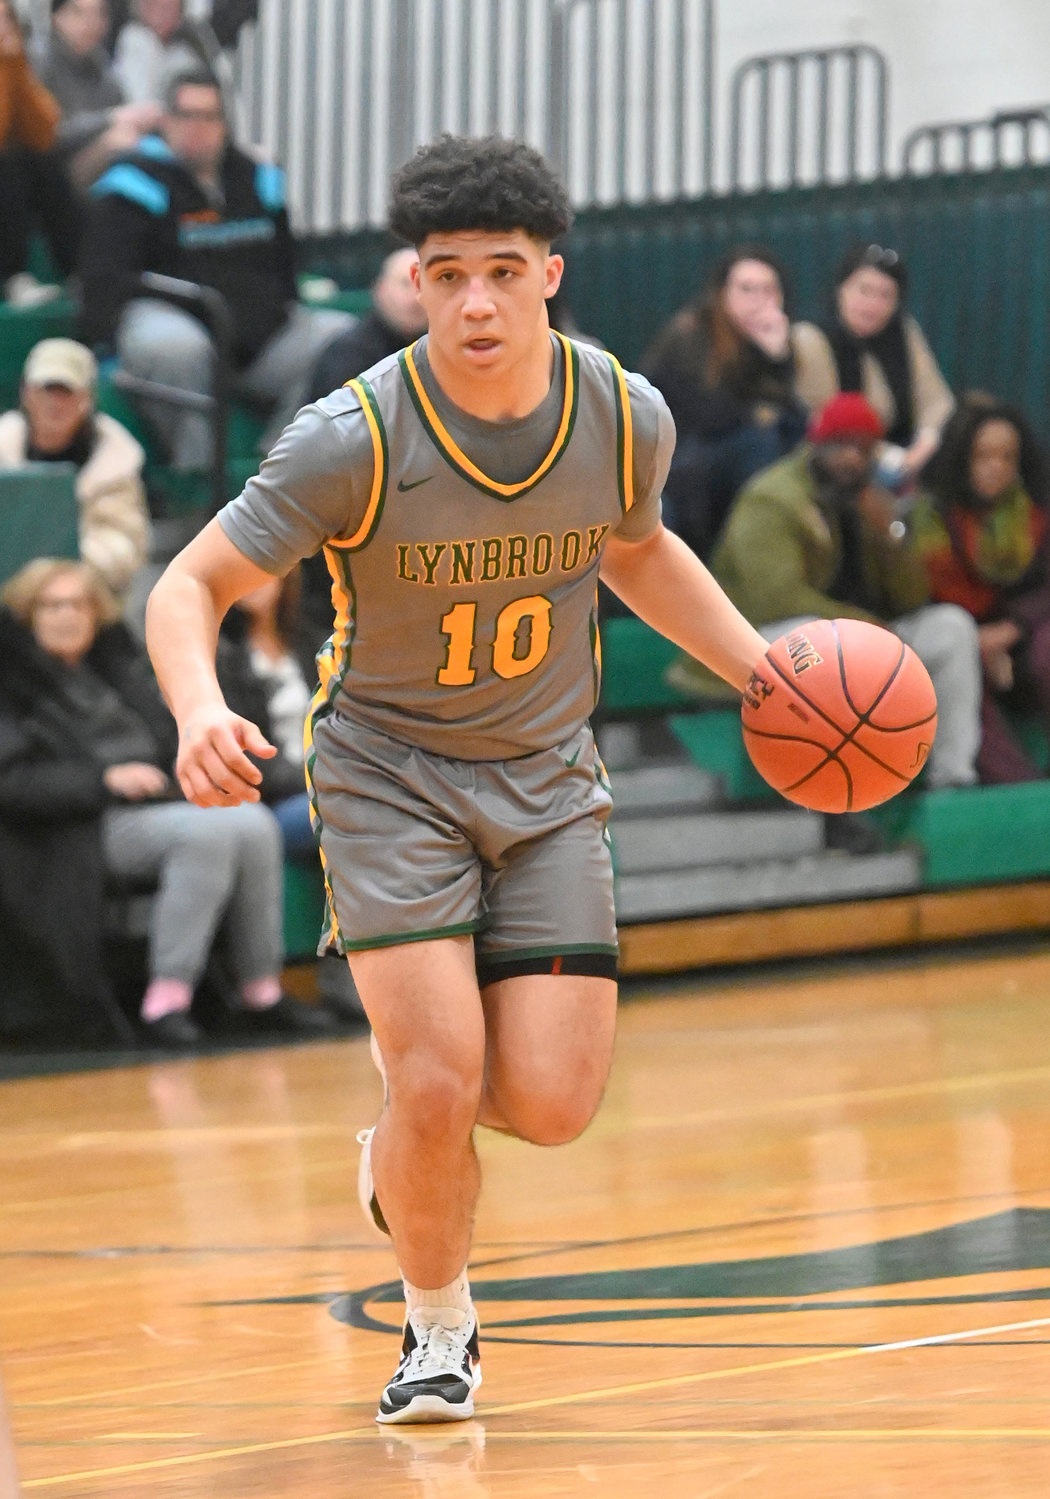 Senior guard Eli Sherman Murphy scored 24 points Jan. 13 and led the Owls’ come-from-behind victory over Plainedge.